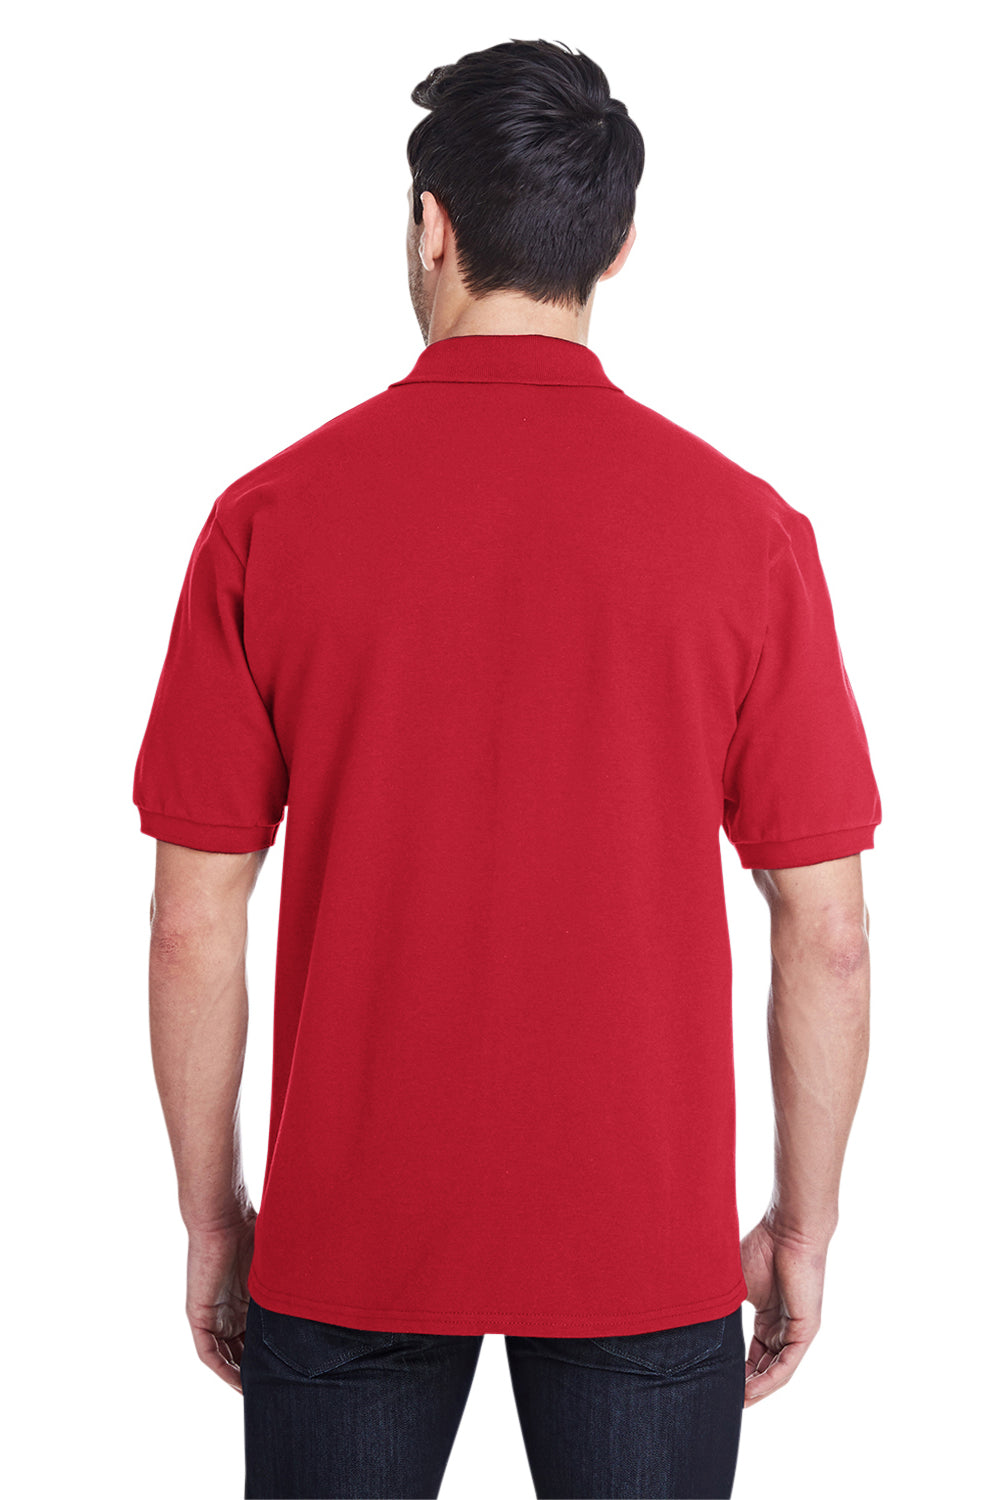 Jerzees 443MR Mens Short Sleeve Polo Shirt Red Back